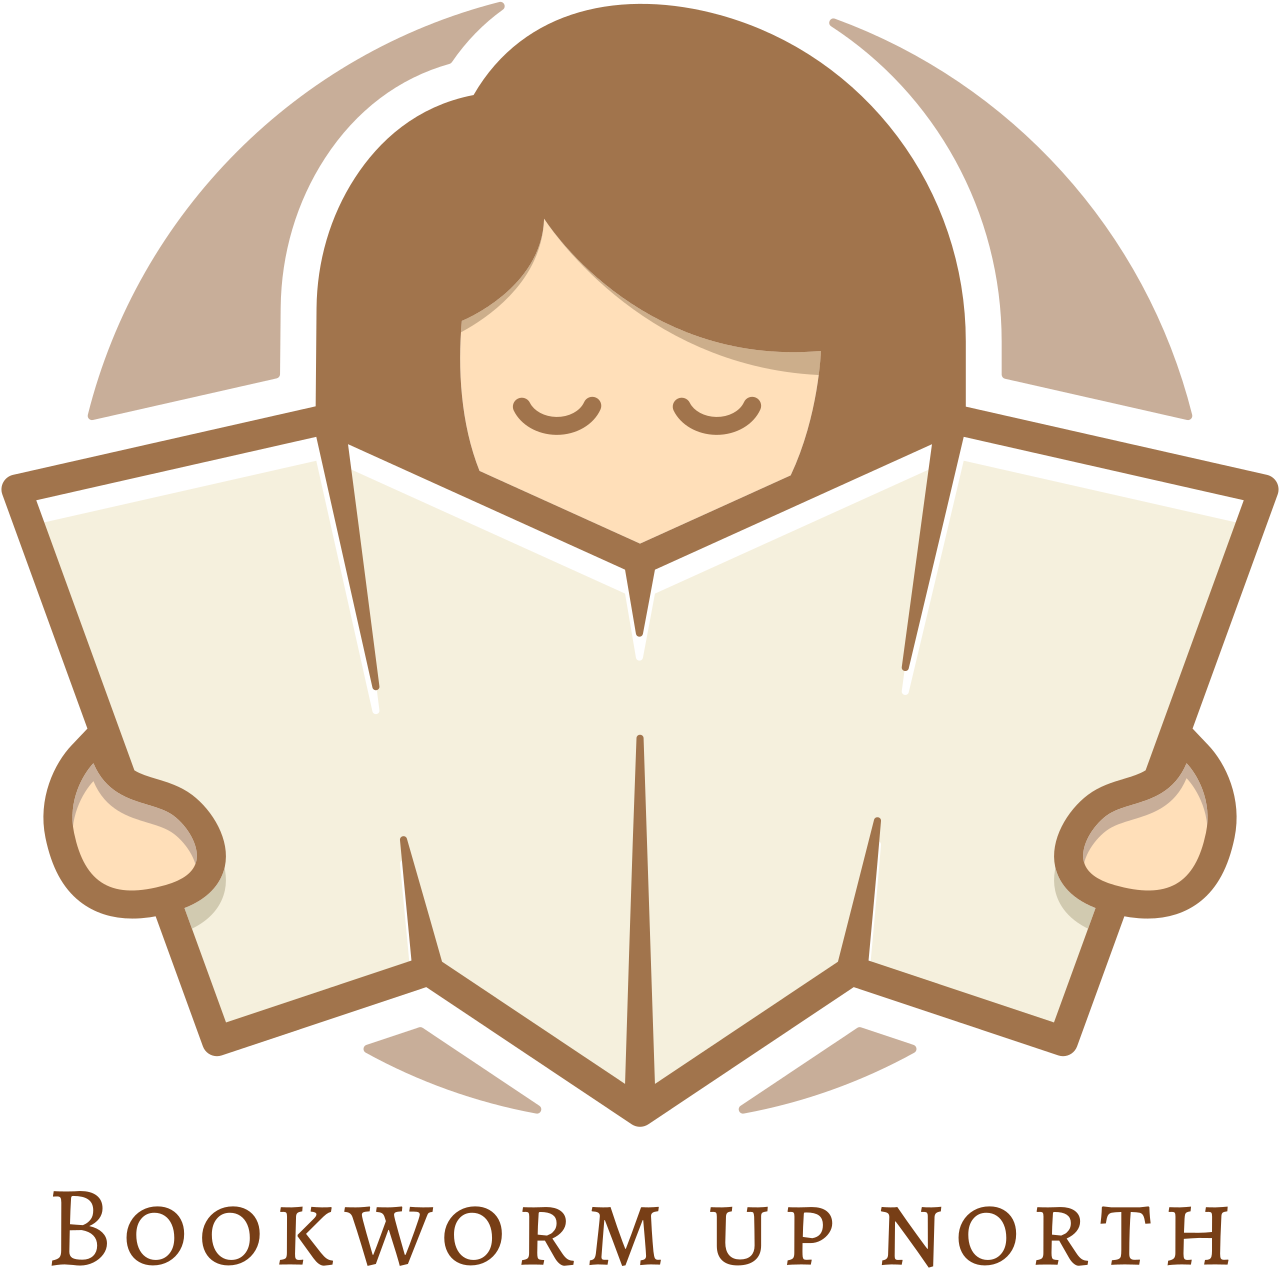 Bookworm Up North's web page